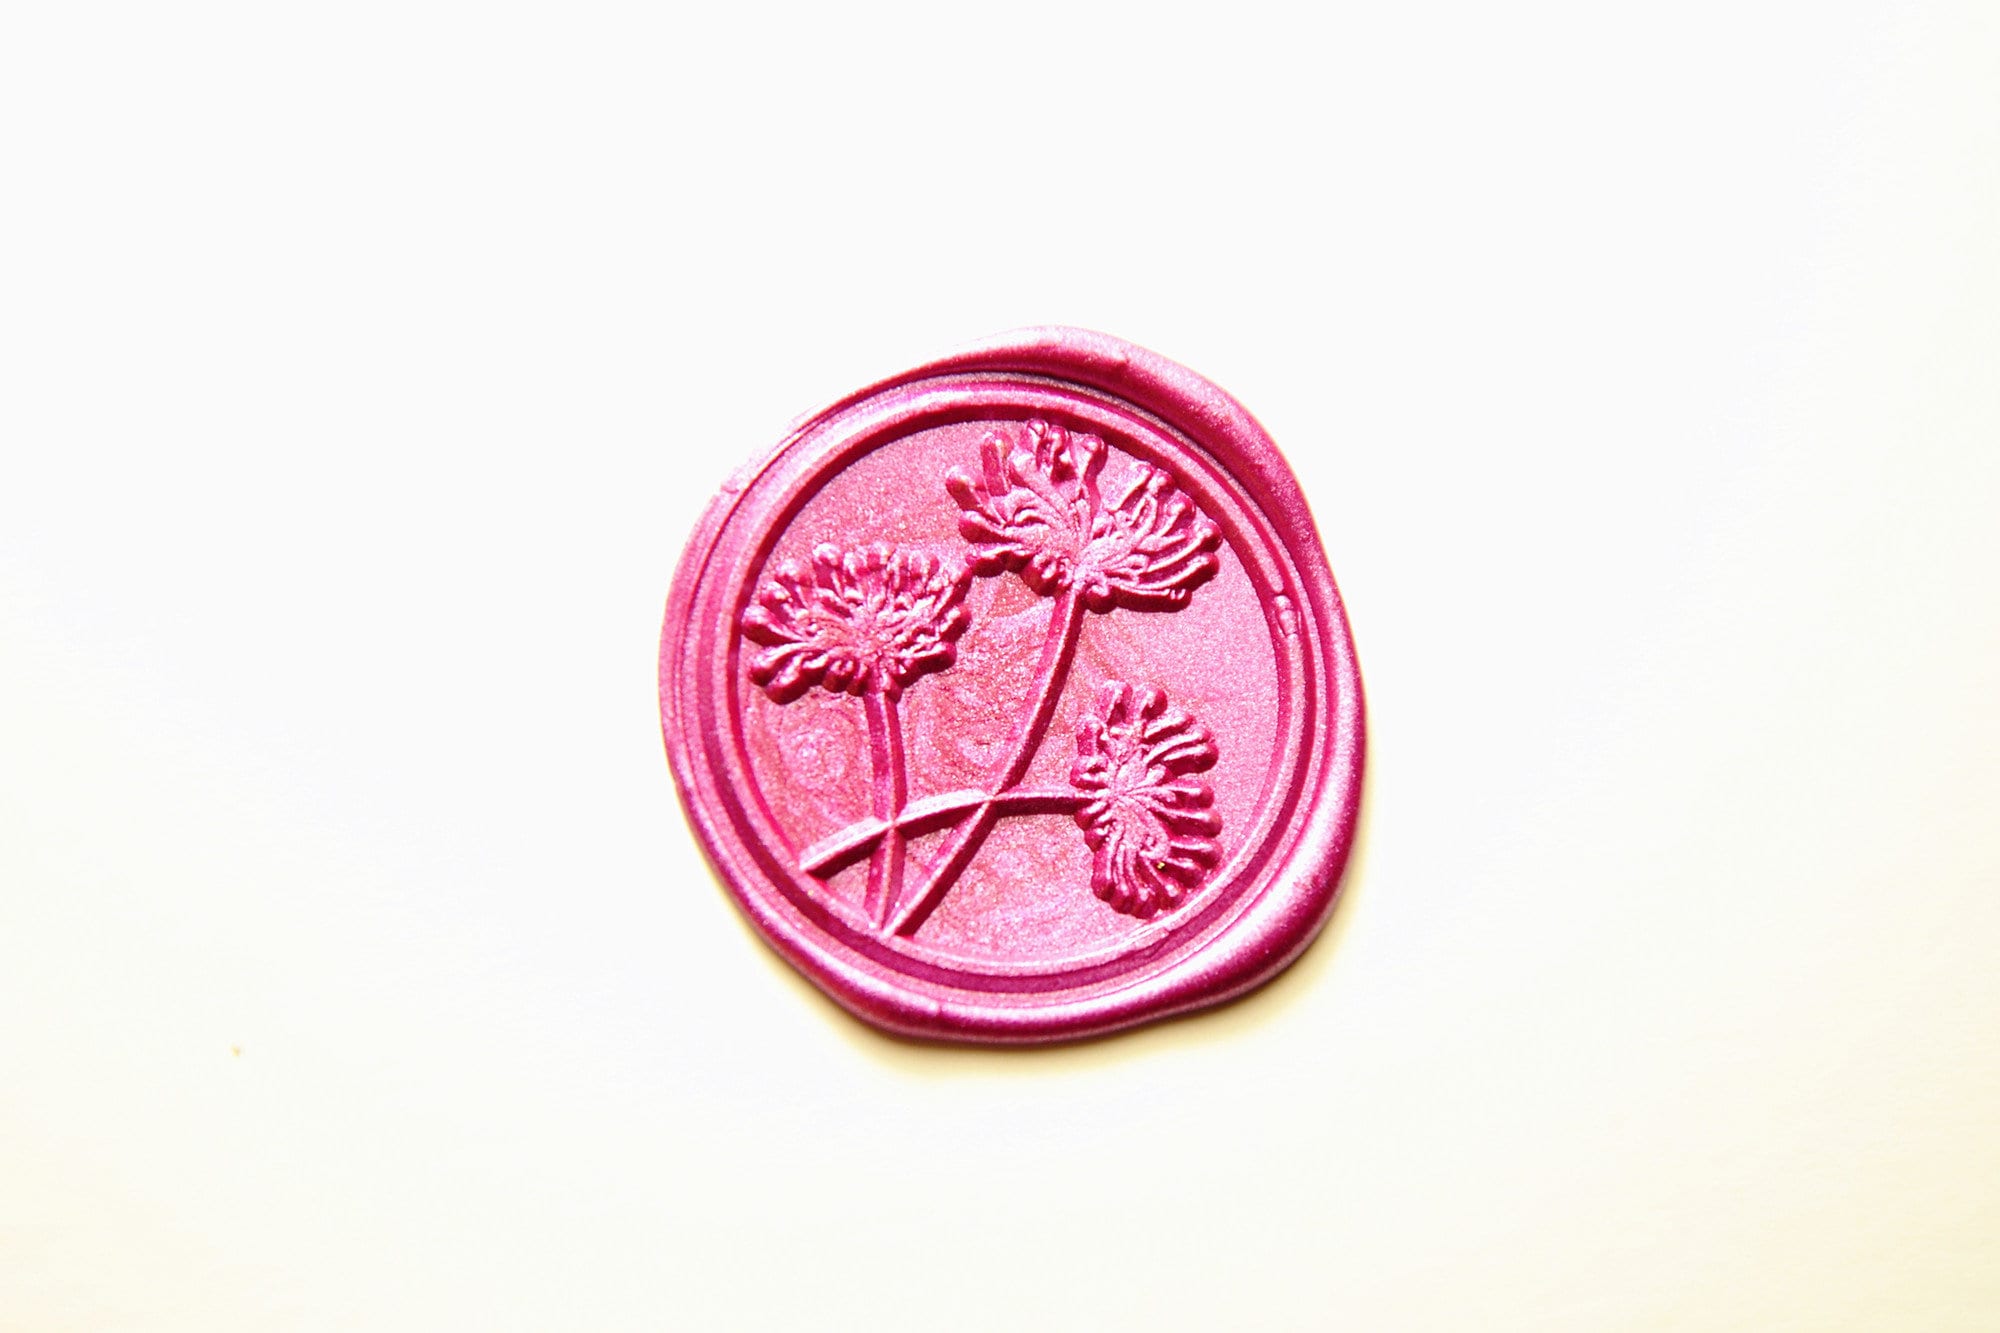 Adhesive Wax Seal Stickers 25PCS Red Rose Wax Seal Sticker for Envelopes  Decorative Stamp Stickers Envelope Stickers for Wedding Invitation Craft